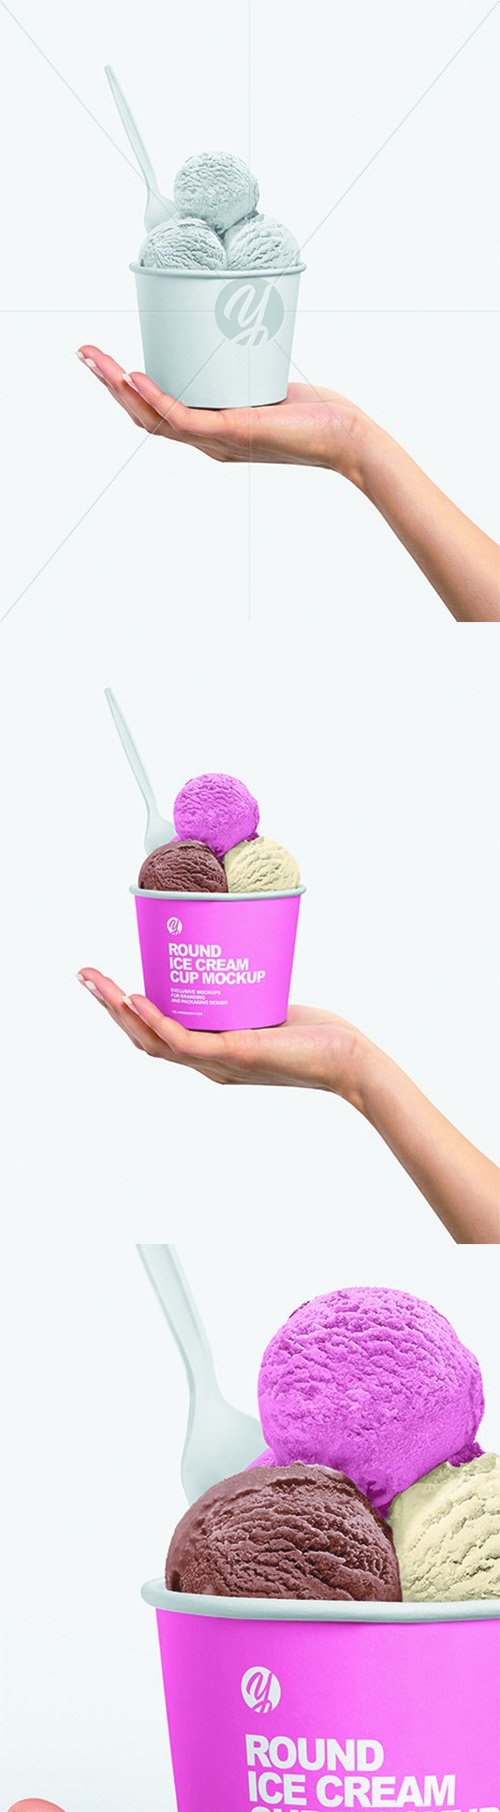 Download Download Paper Ice Cream Cup in Hand Mockup 66138 ...